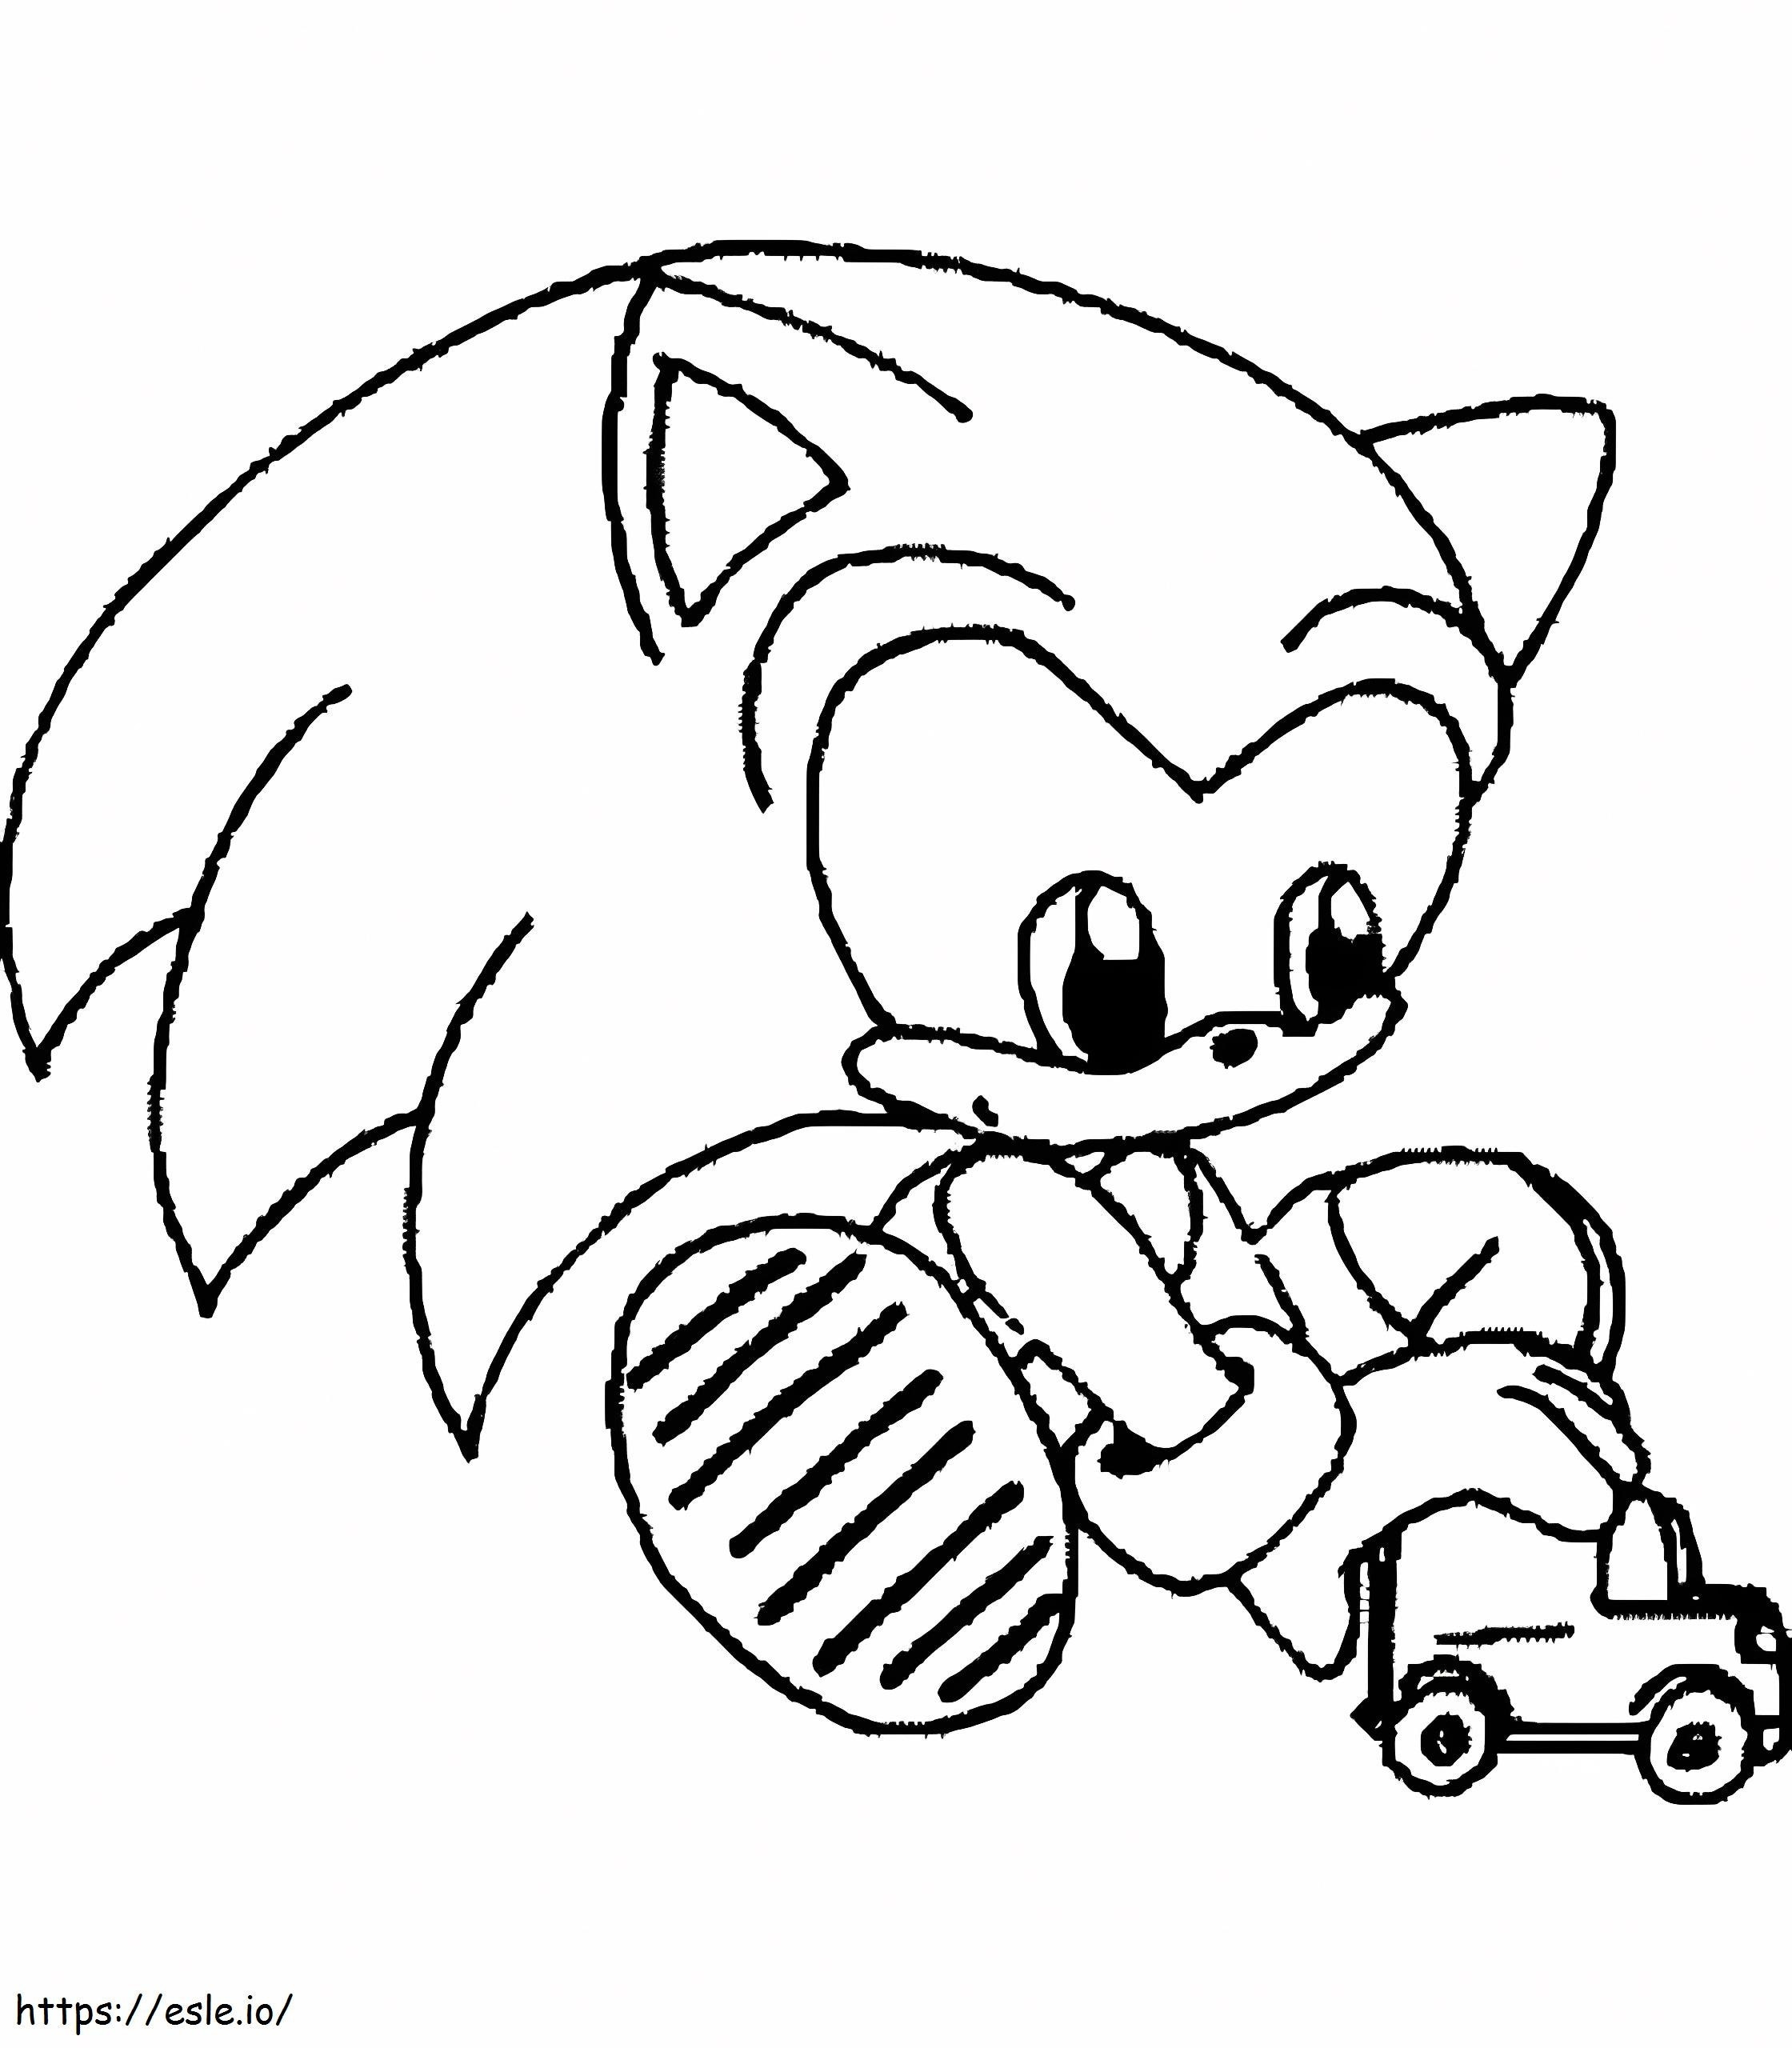 Baby Sonic coloring page